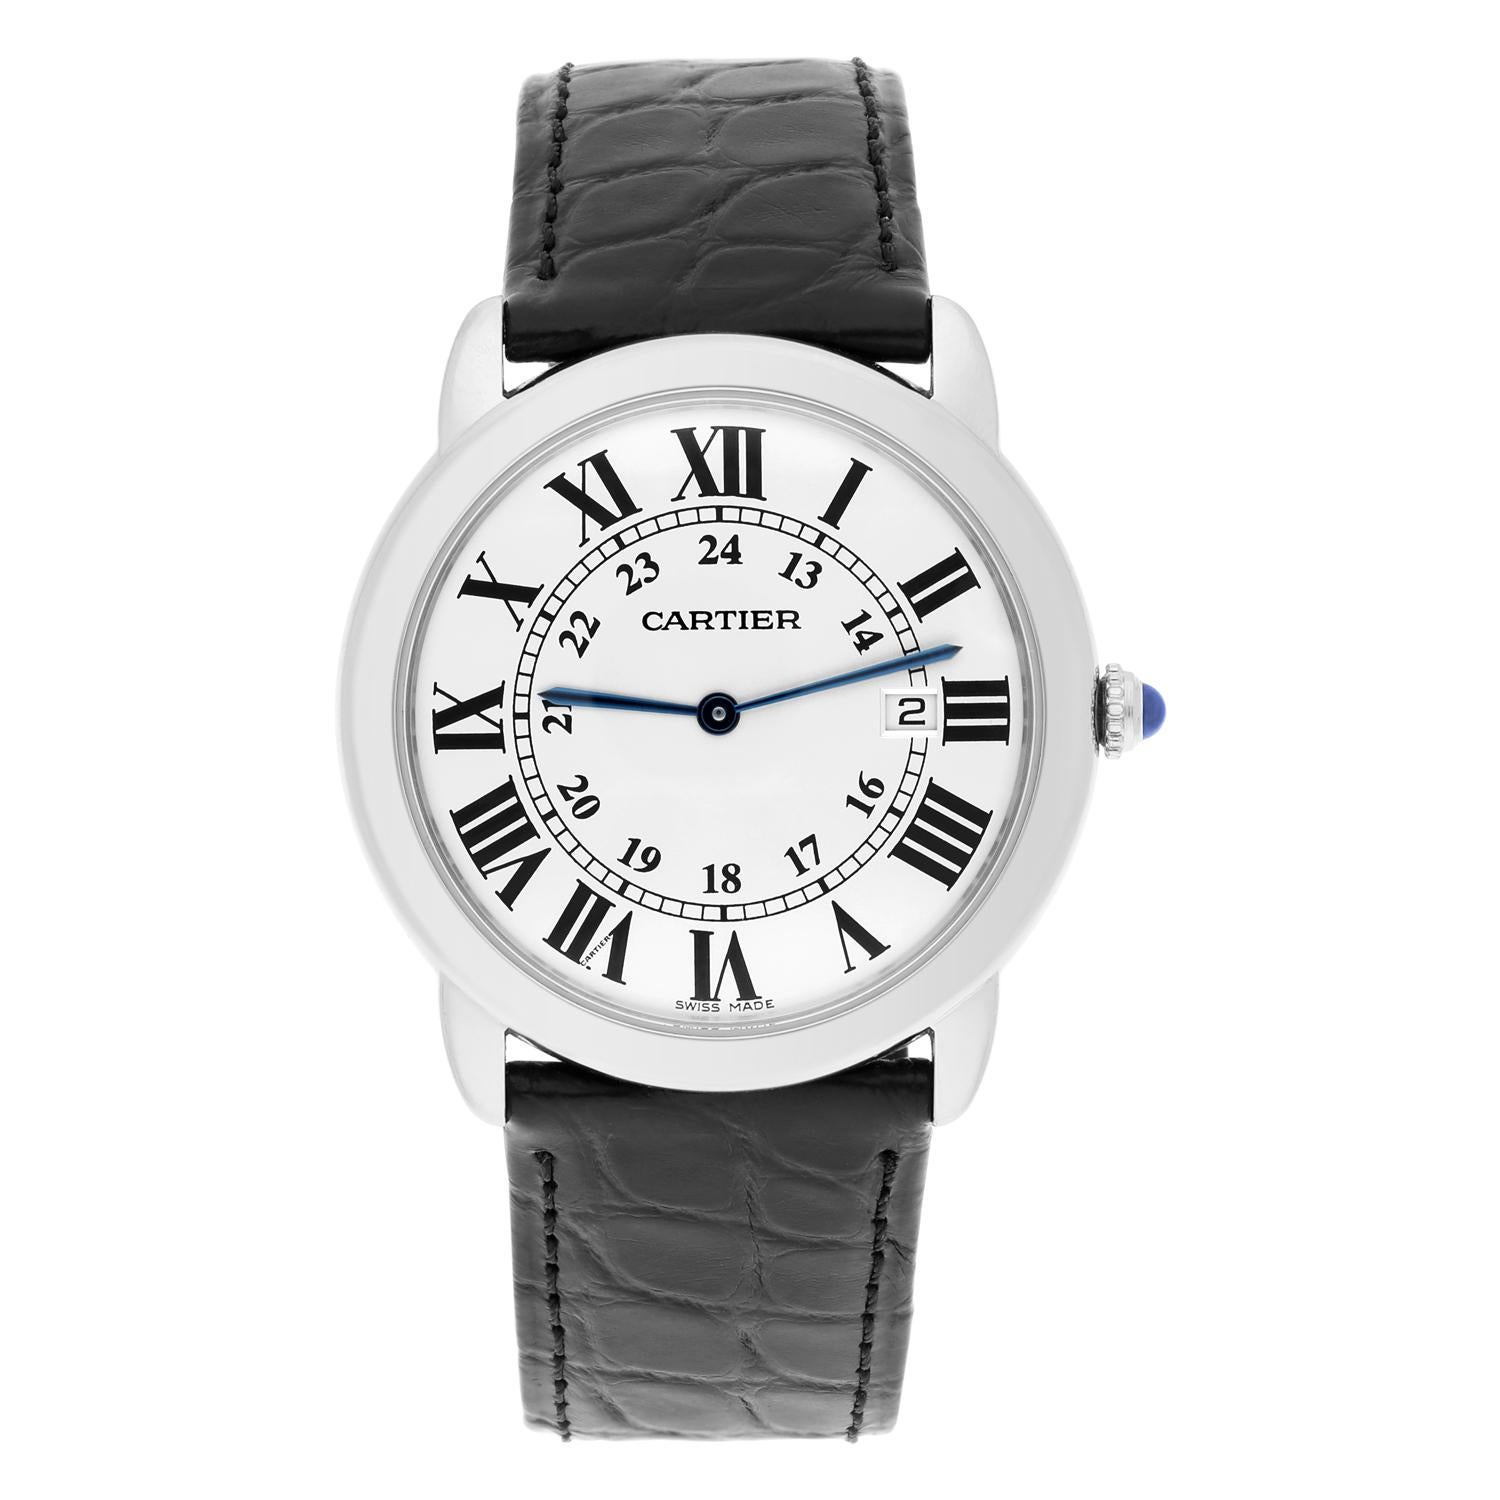 This stunning Cartier Ronde de Cartier wristwatch is a true luxury timepiece. With a sleek silver dial featuring elegant Roman numerals and a smooth bezel in a matching silver tone, this watch exudes class and sophistication. The 36mm round case is